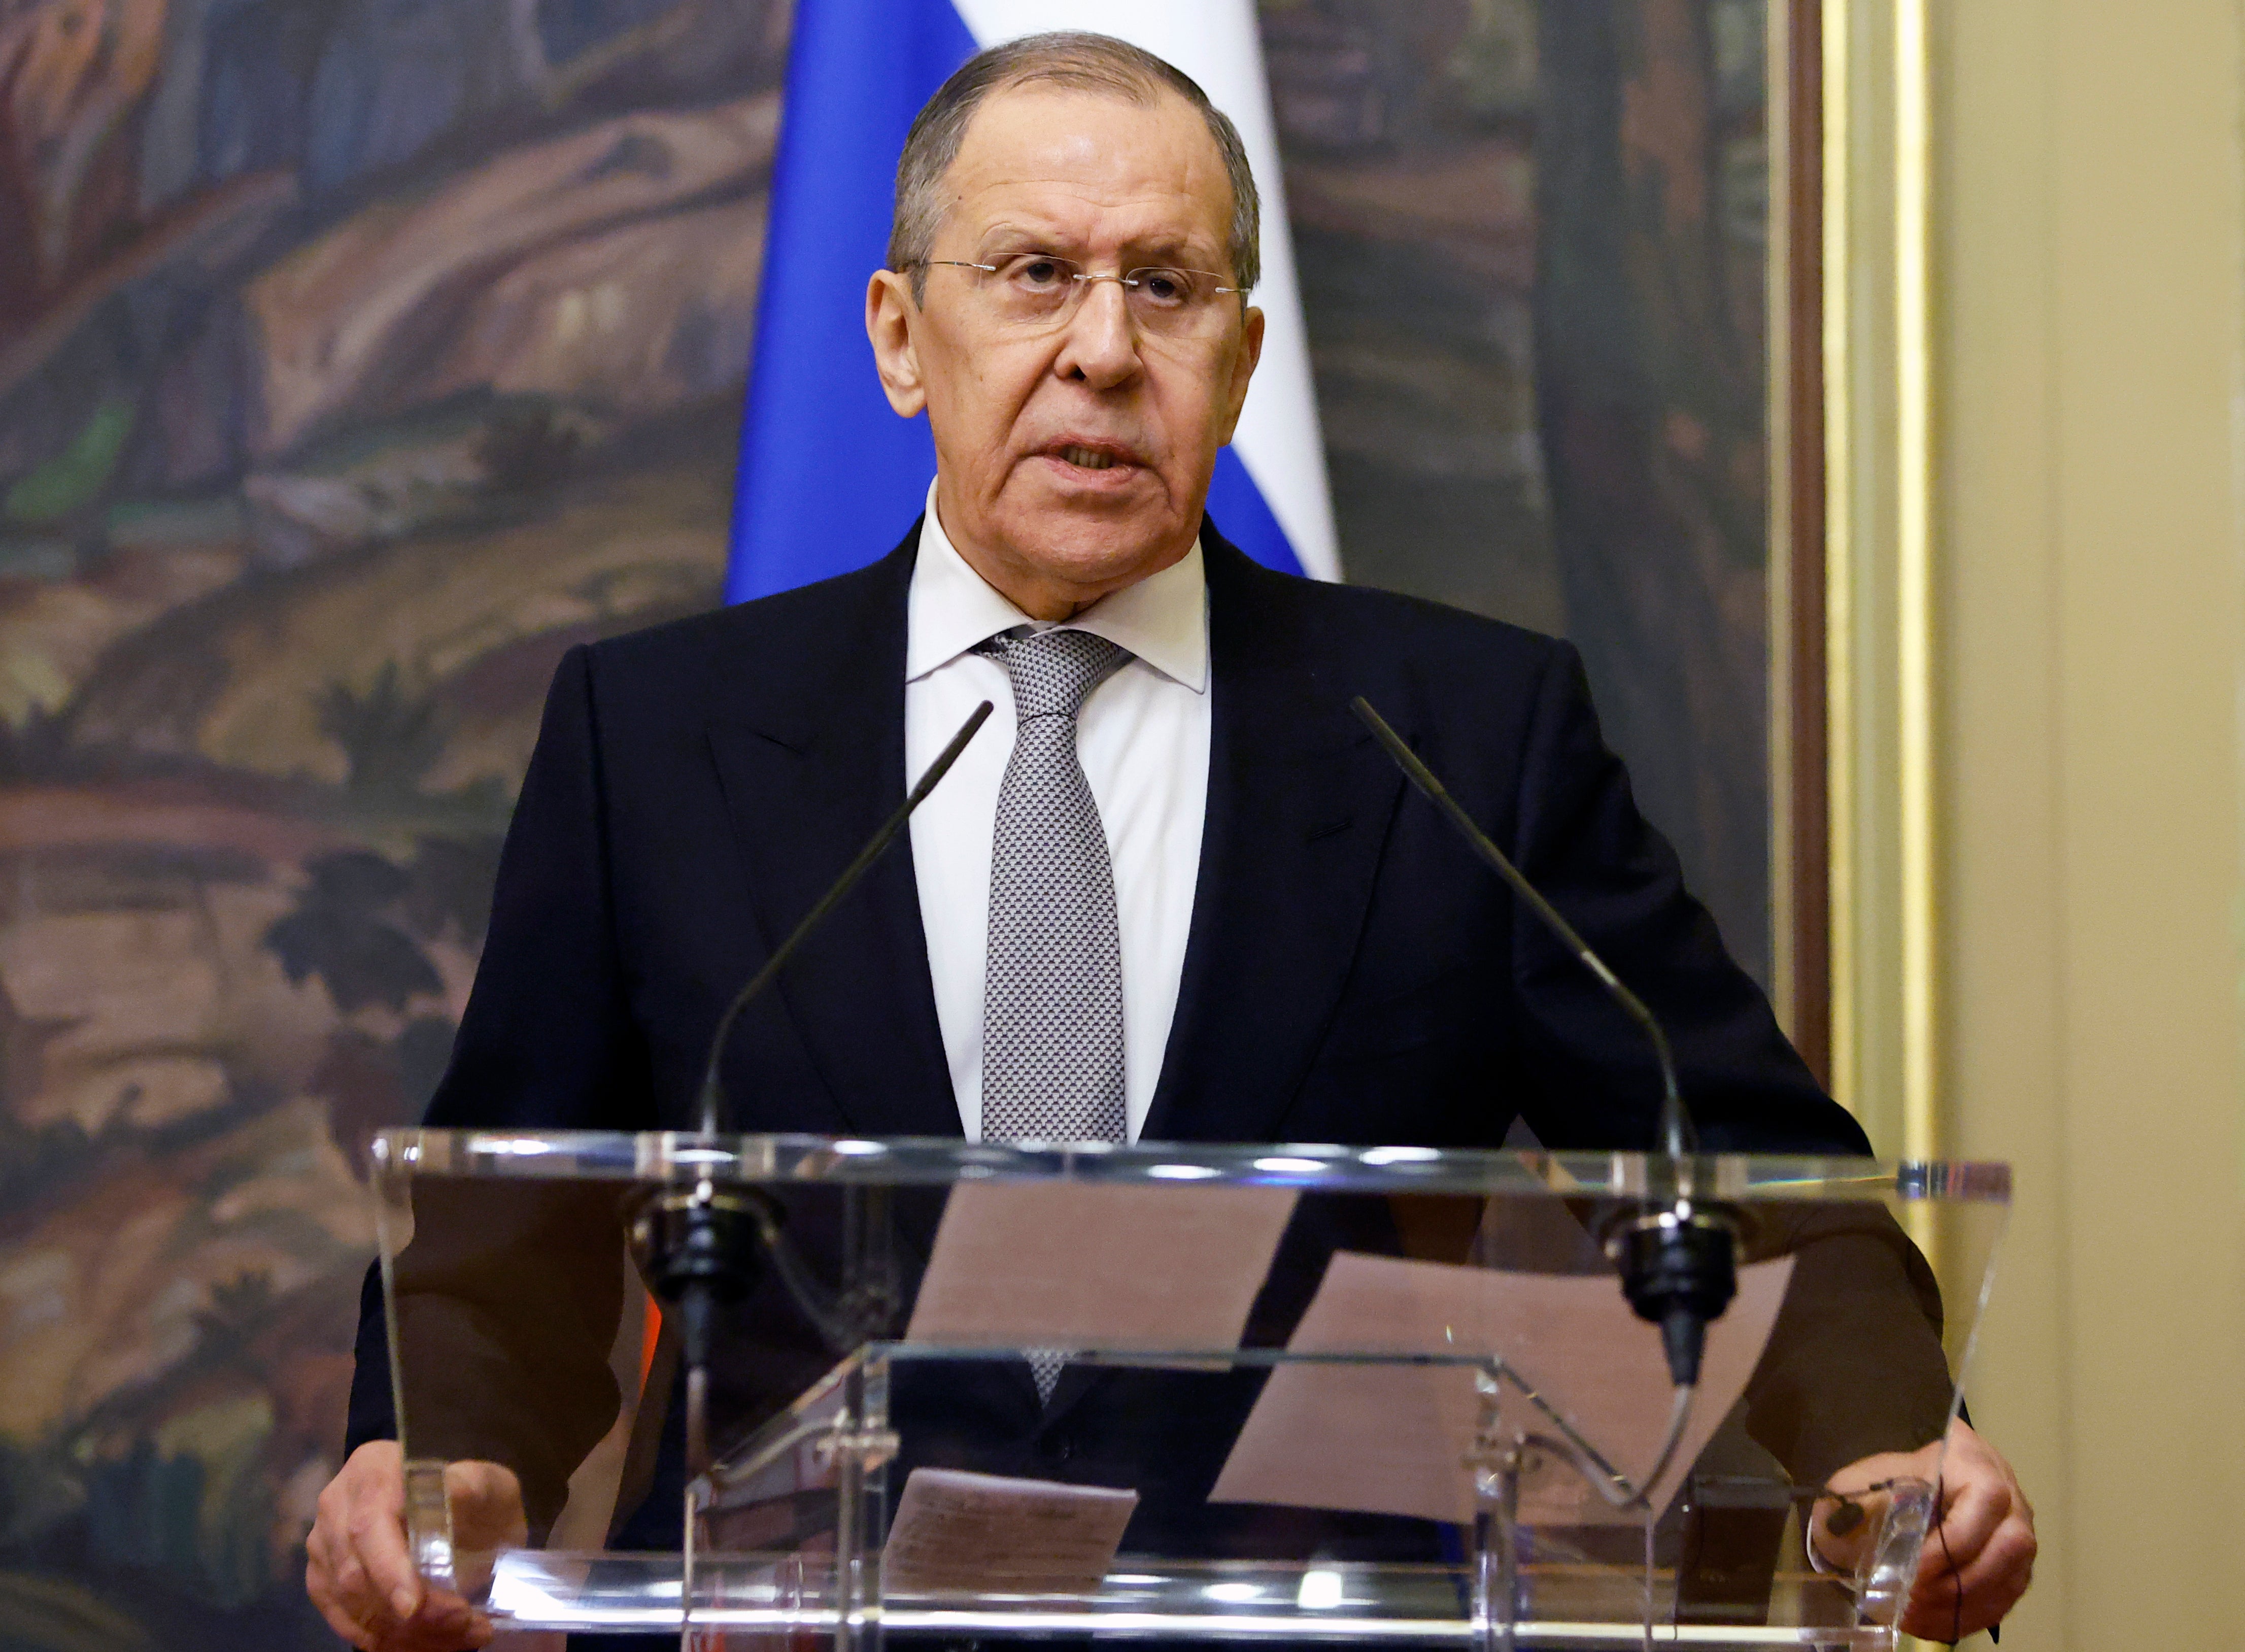 Sergei Lavrov echoed talk of a ‘compromise’ between Russia and Ukraine